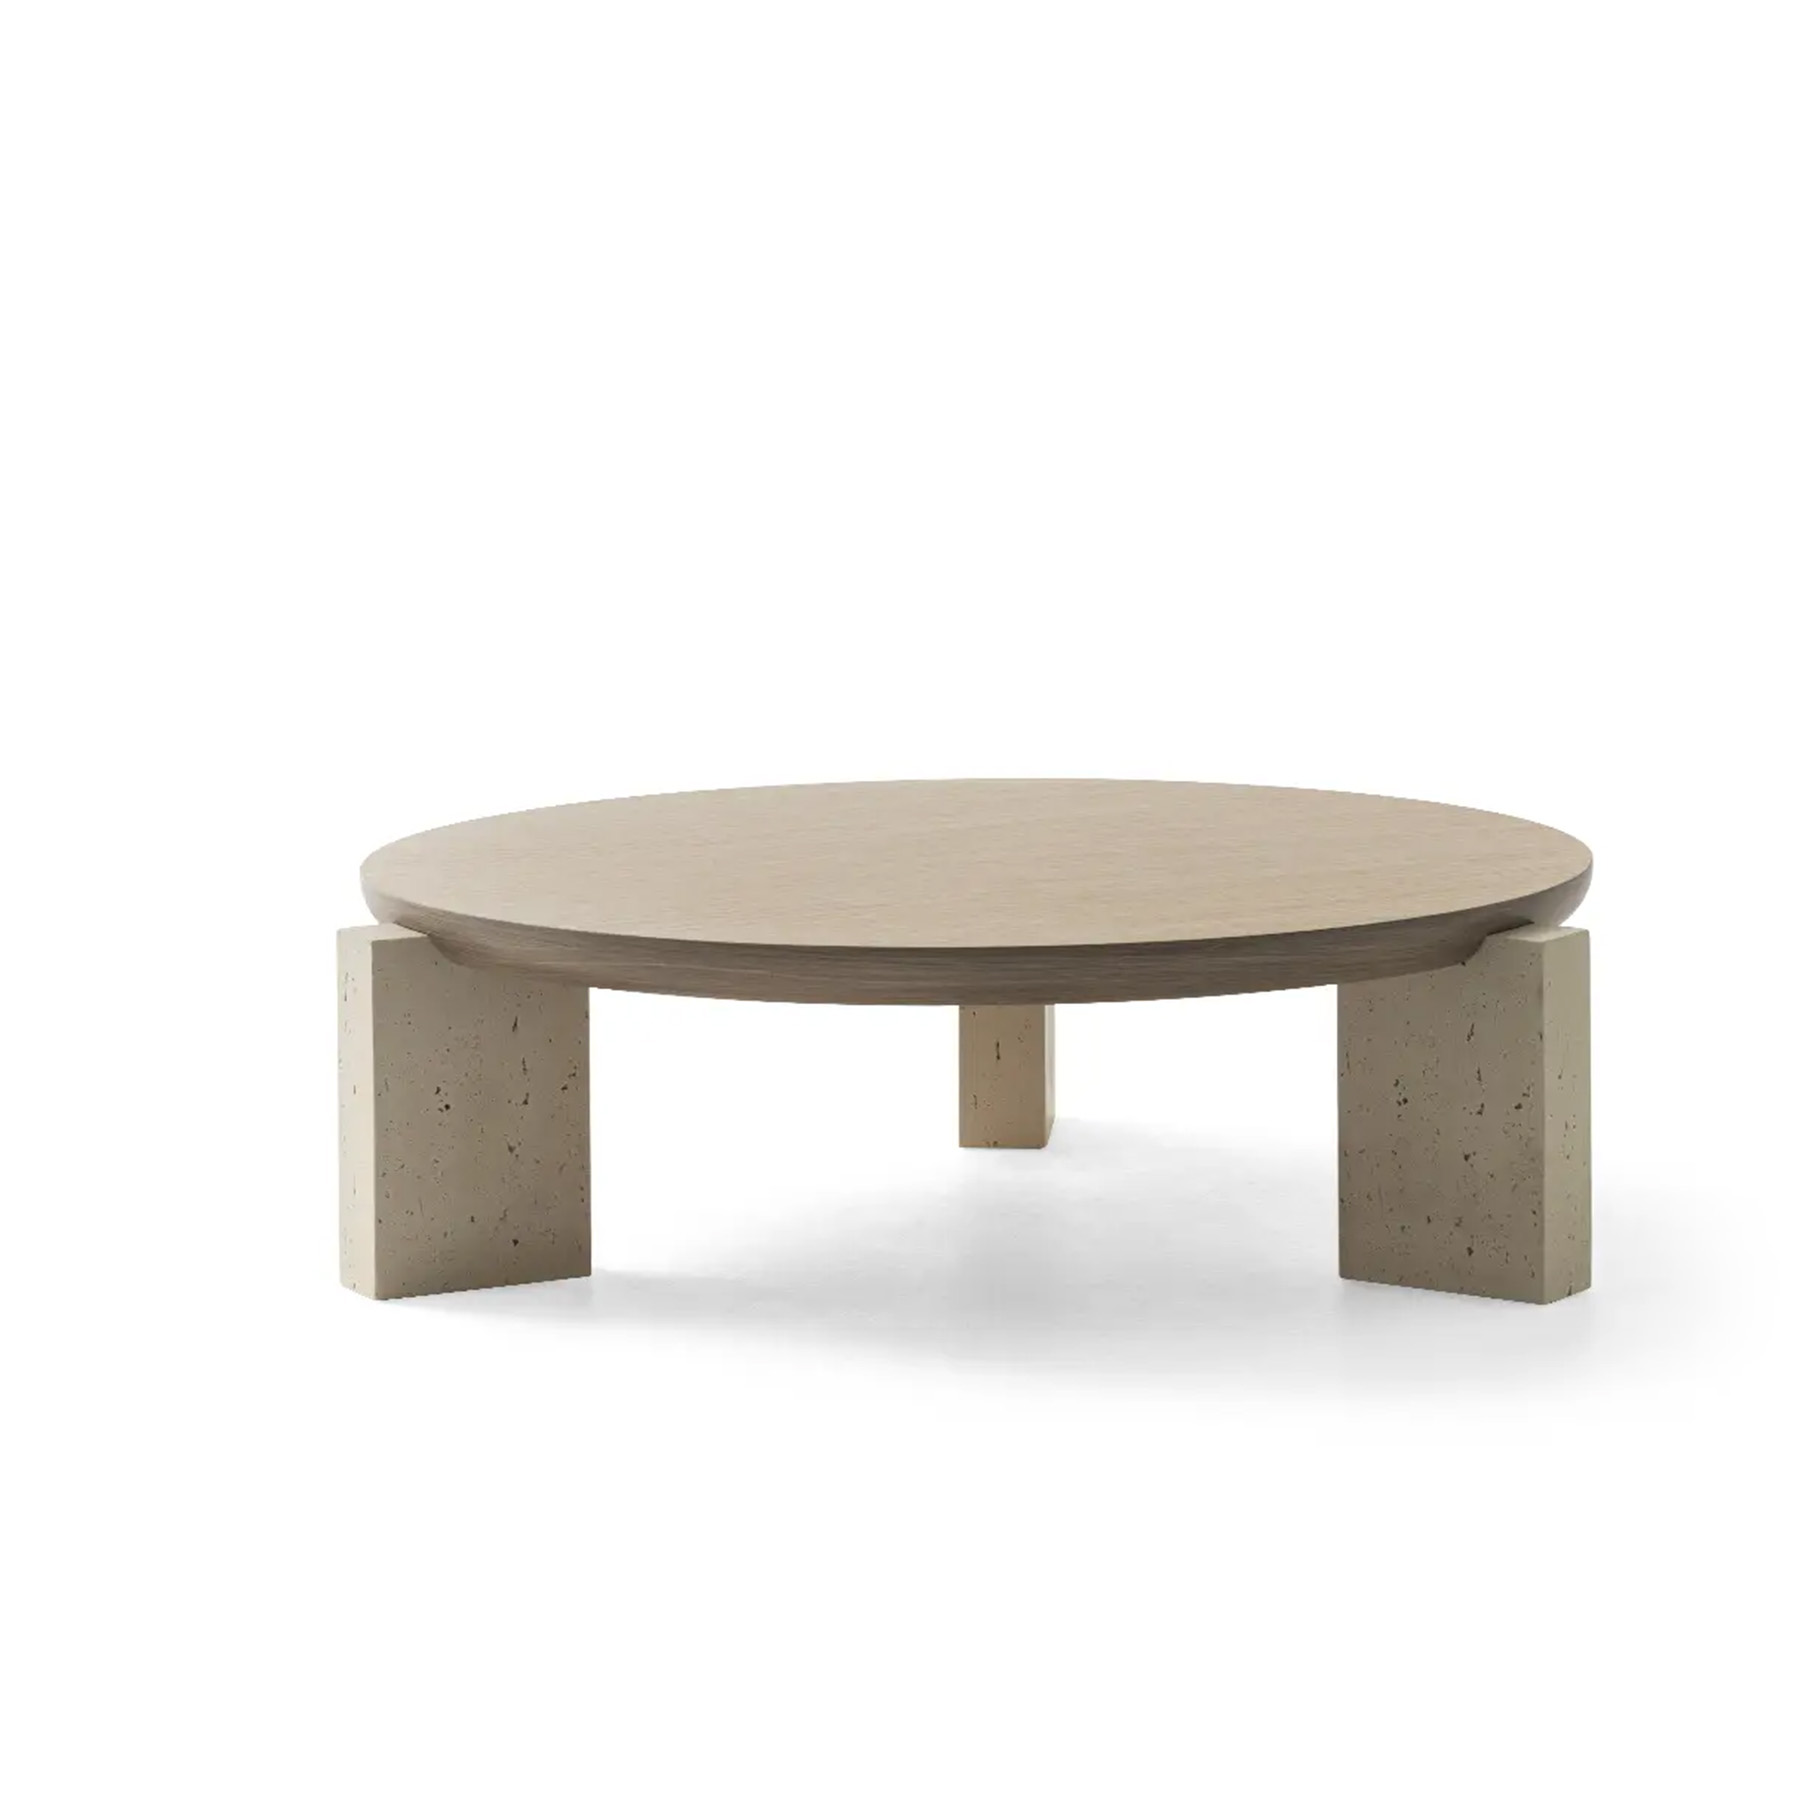 nota round coffee table with wooden table top and stone legs modern design overal view